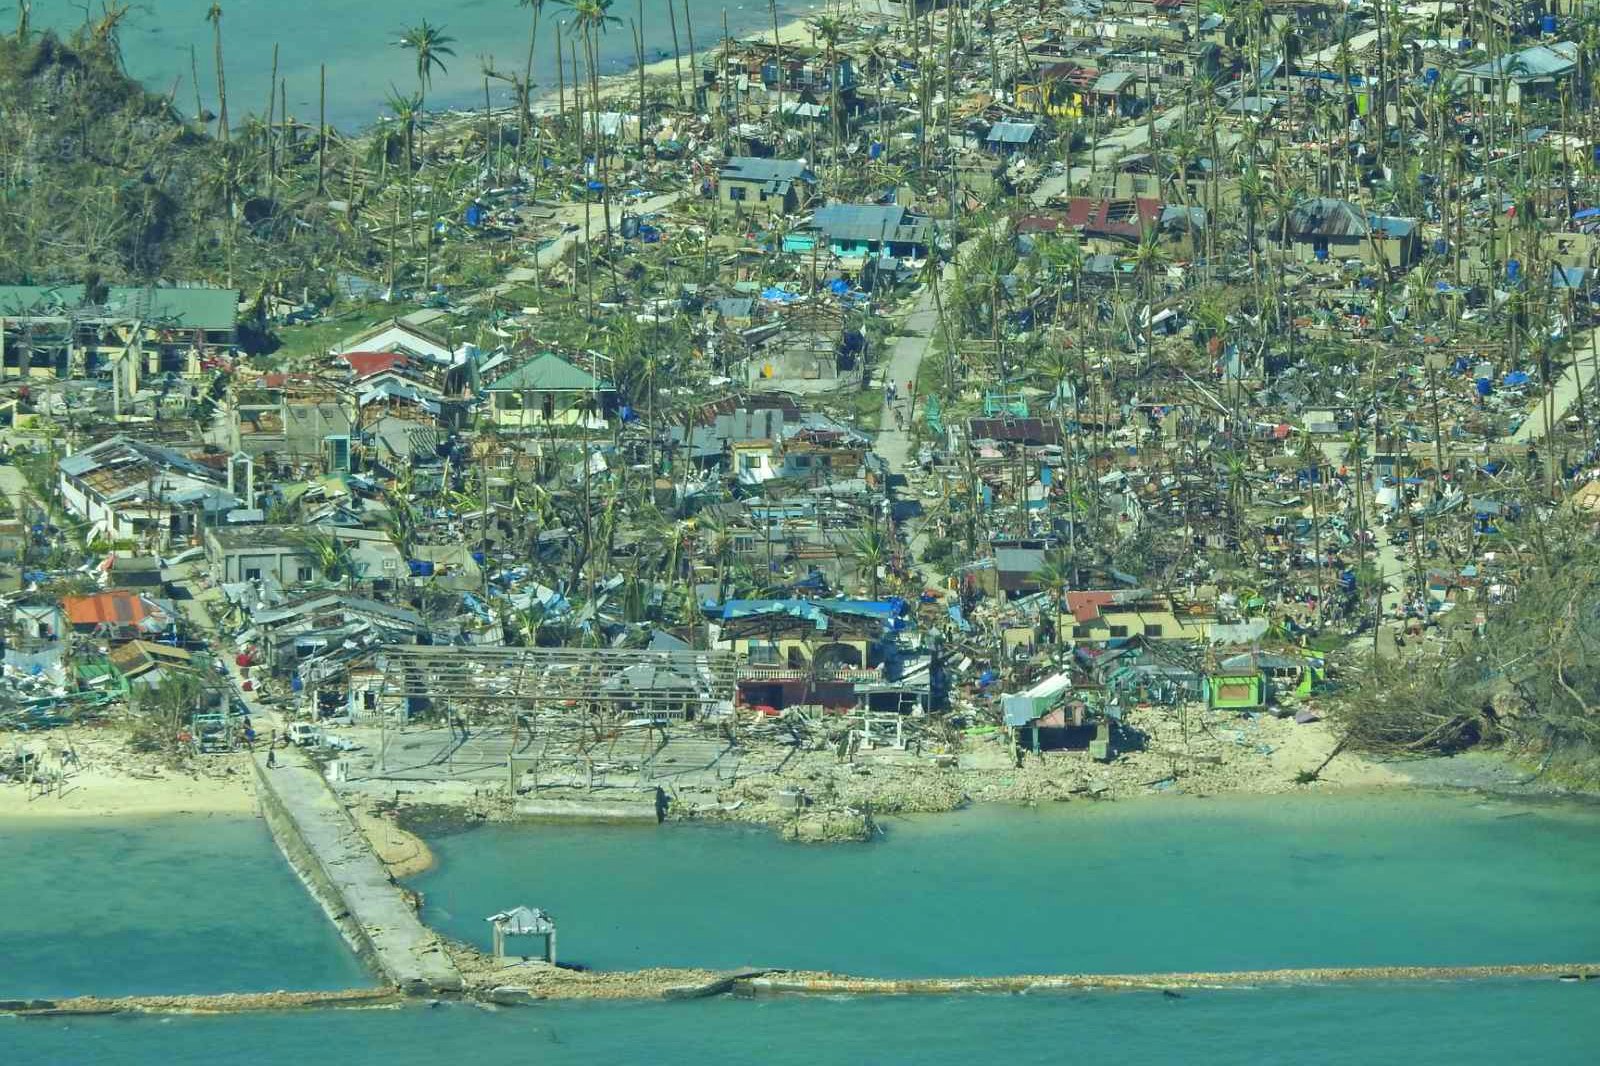 Church releases statement after catastrophic category 5 typhoon battered the Philippines